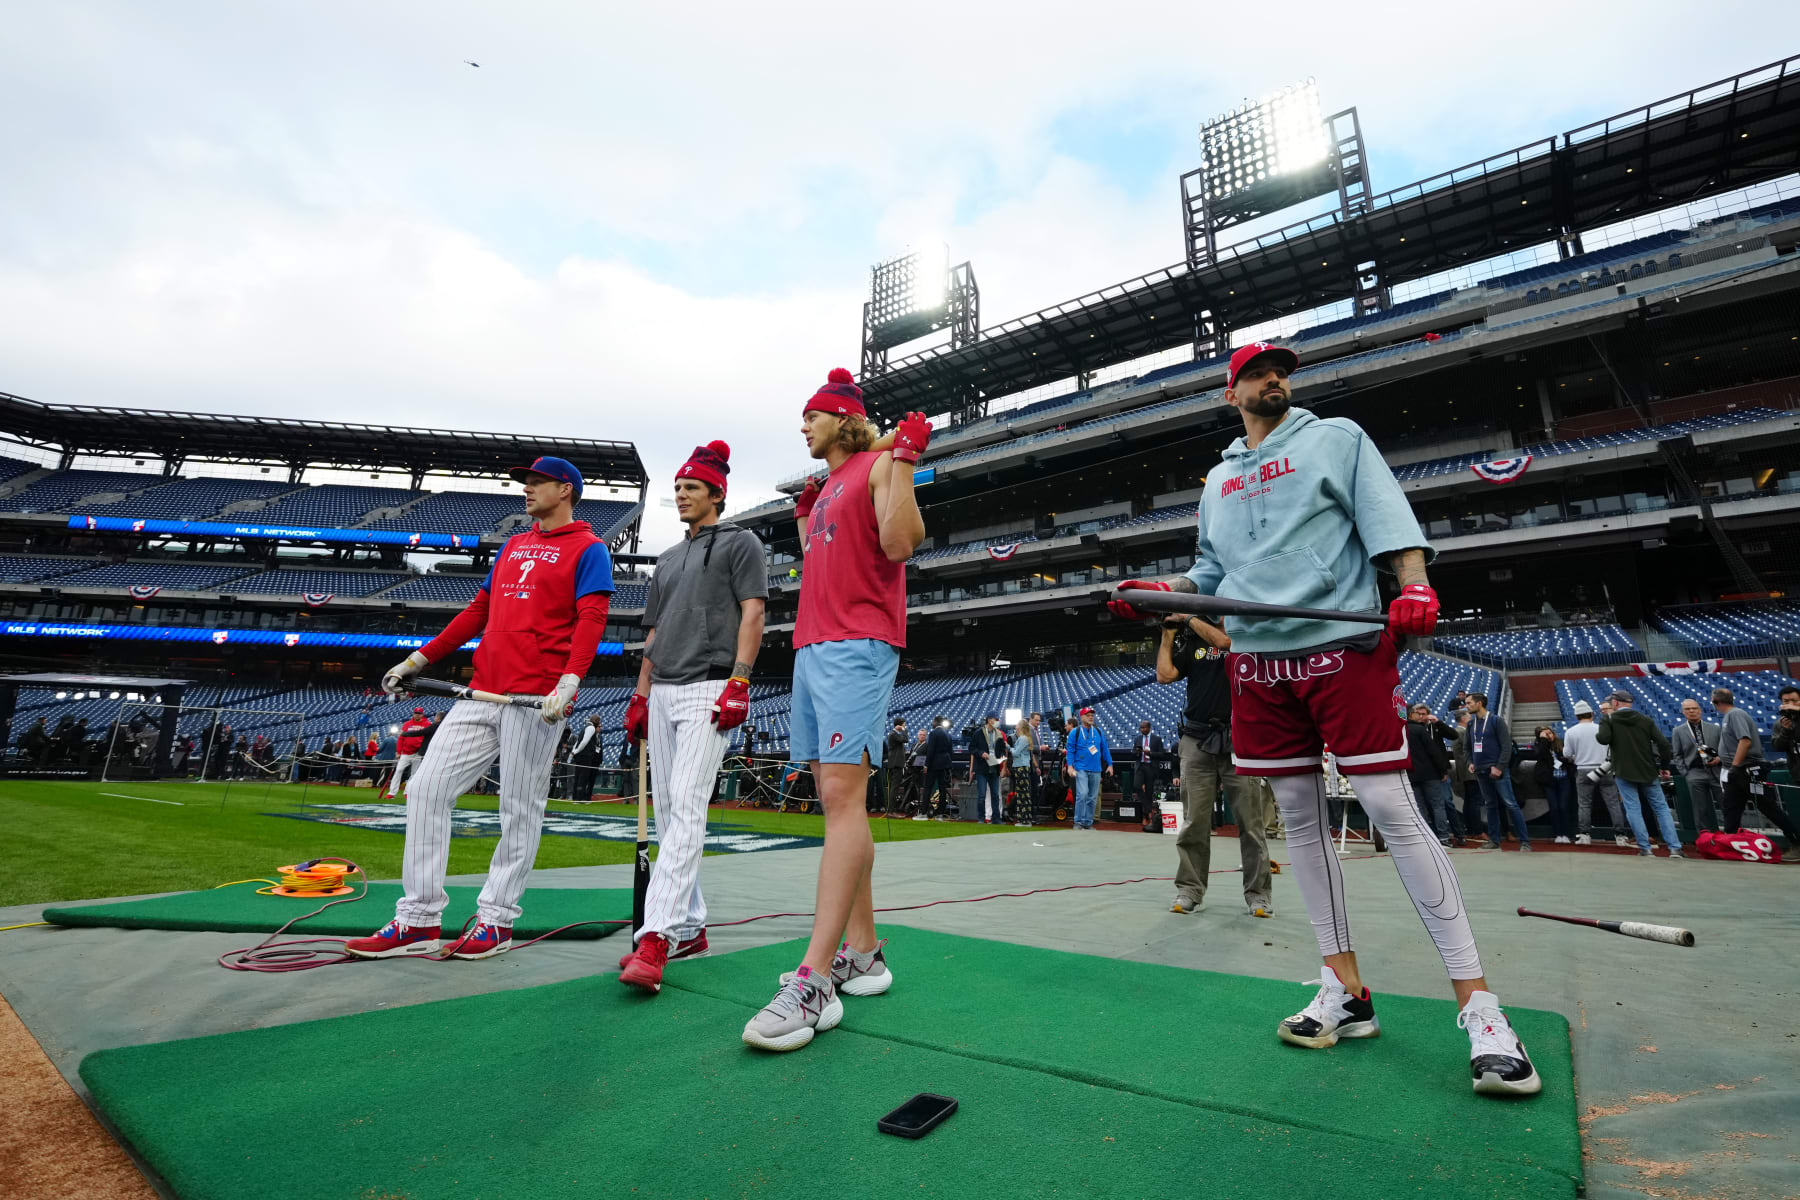 Game 3 of World Series postponed  Phillies Nation - Your source